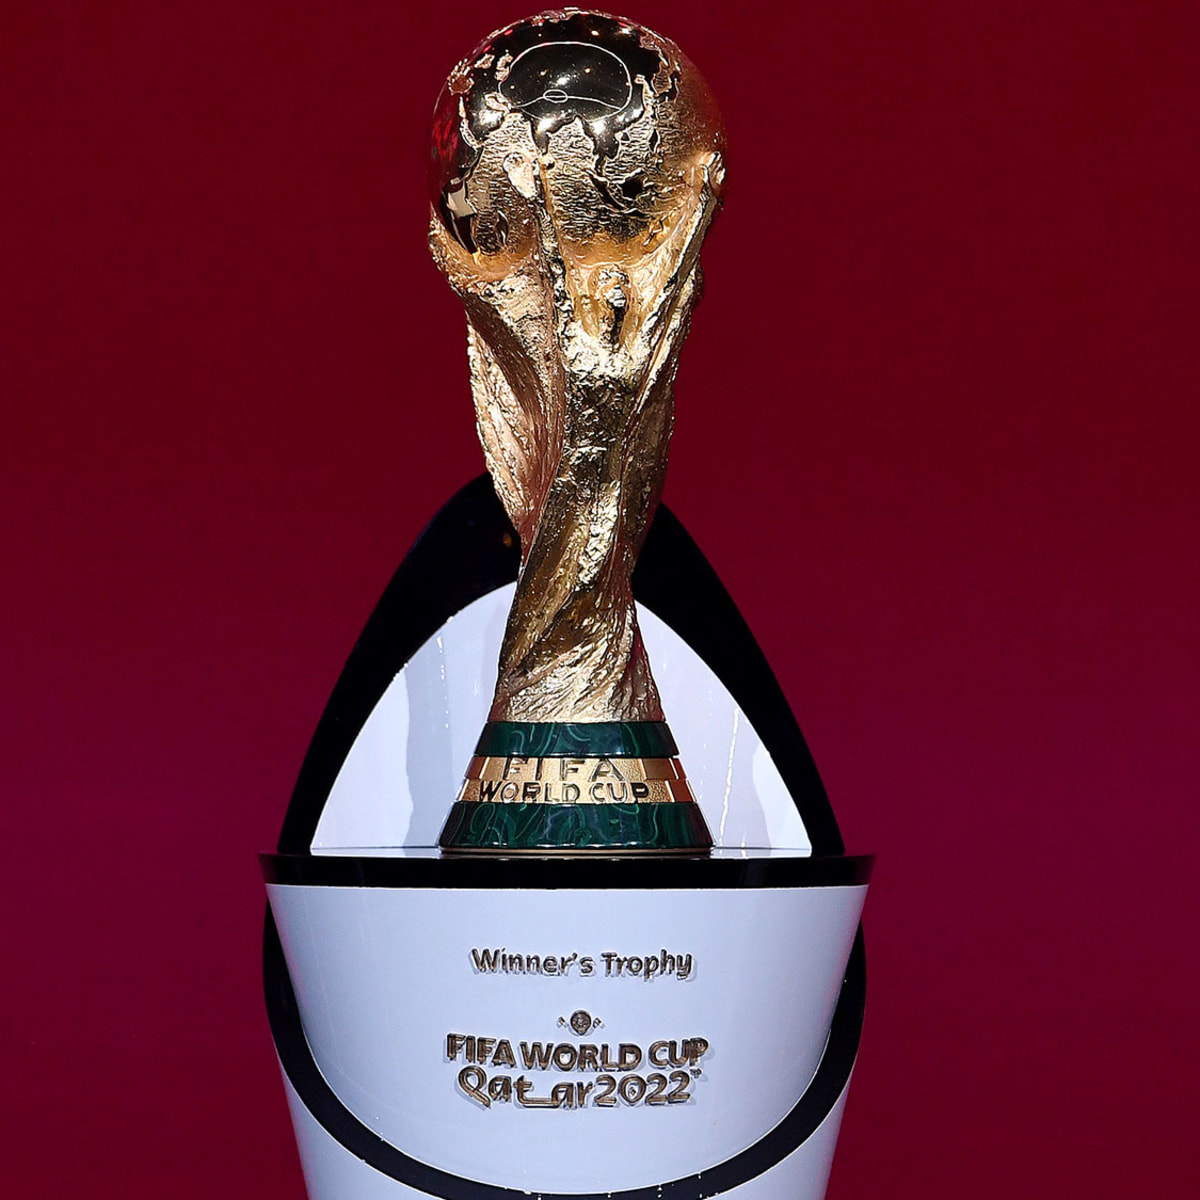 Qatar World Cup ticket sales has been launched at reduced prices